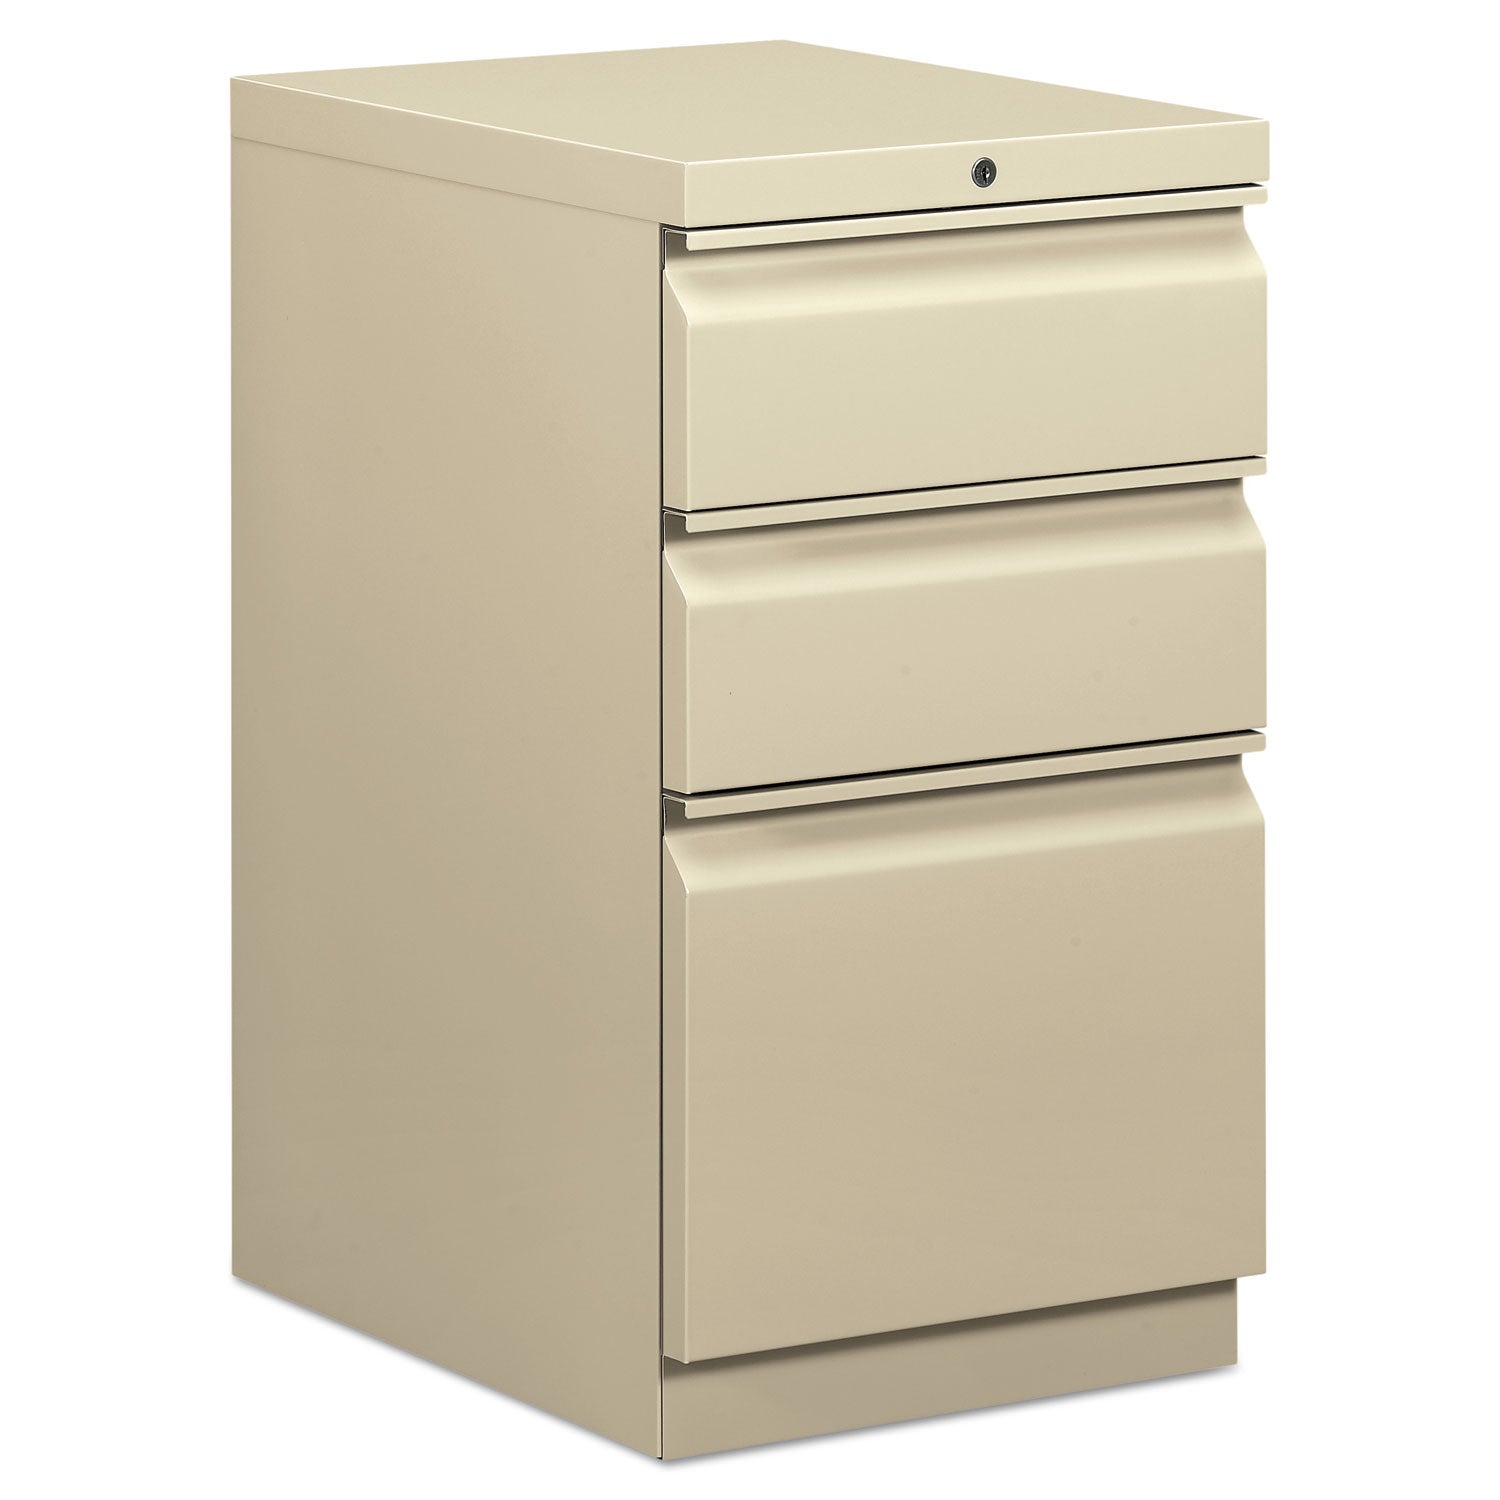 mobile-pedestals-left-or-right-3-drawers-box-box-file-legal-letter-putty-15-x-20-x-28_bsxhbmp2bl - 1